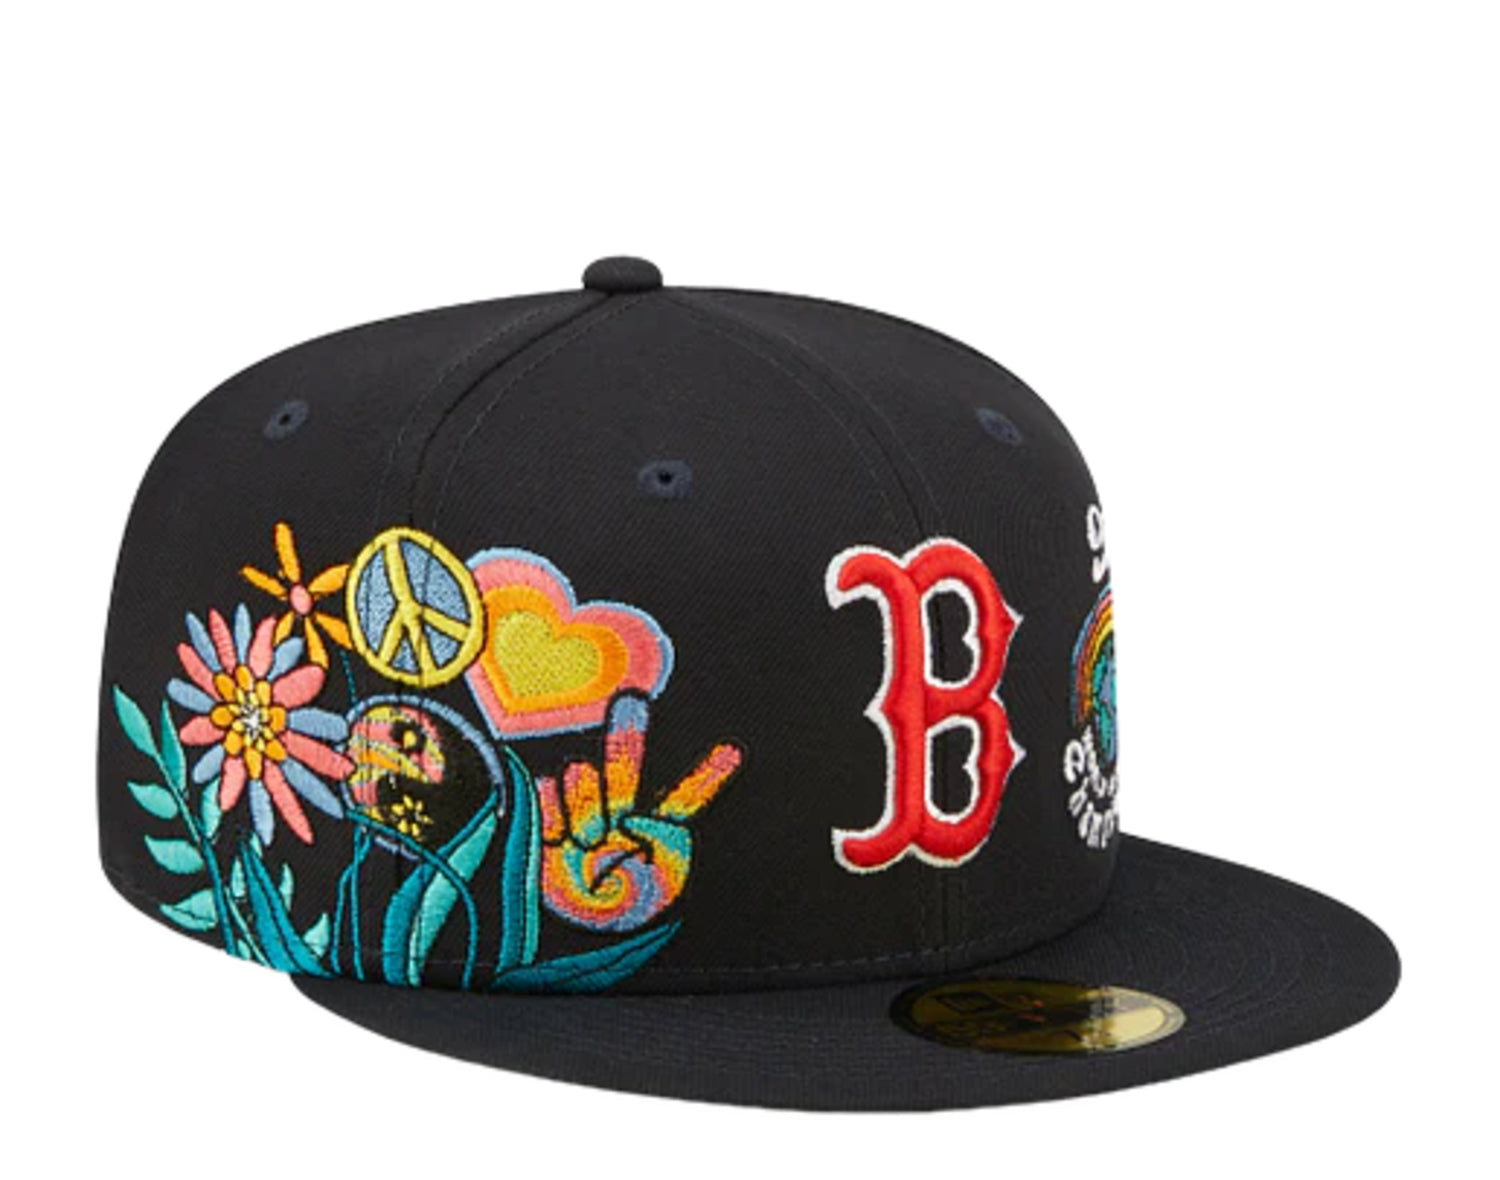 New Era 59Fifty MLB Boston Red Sox Groovy Fitted Hat